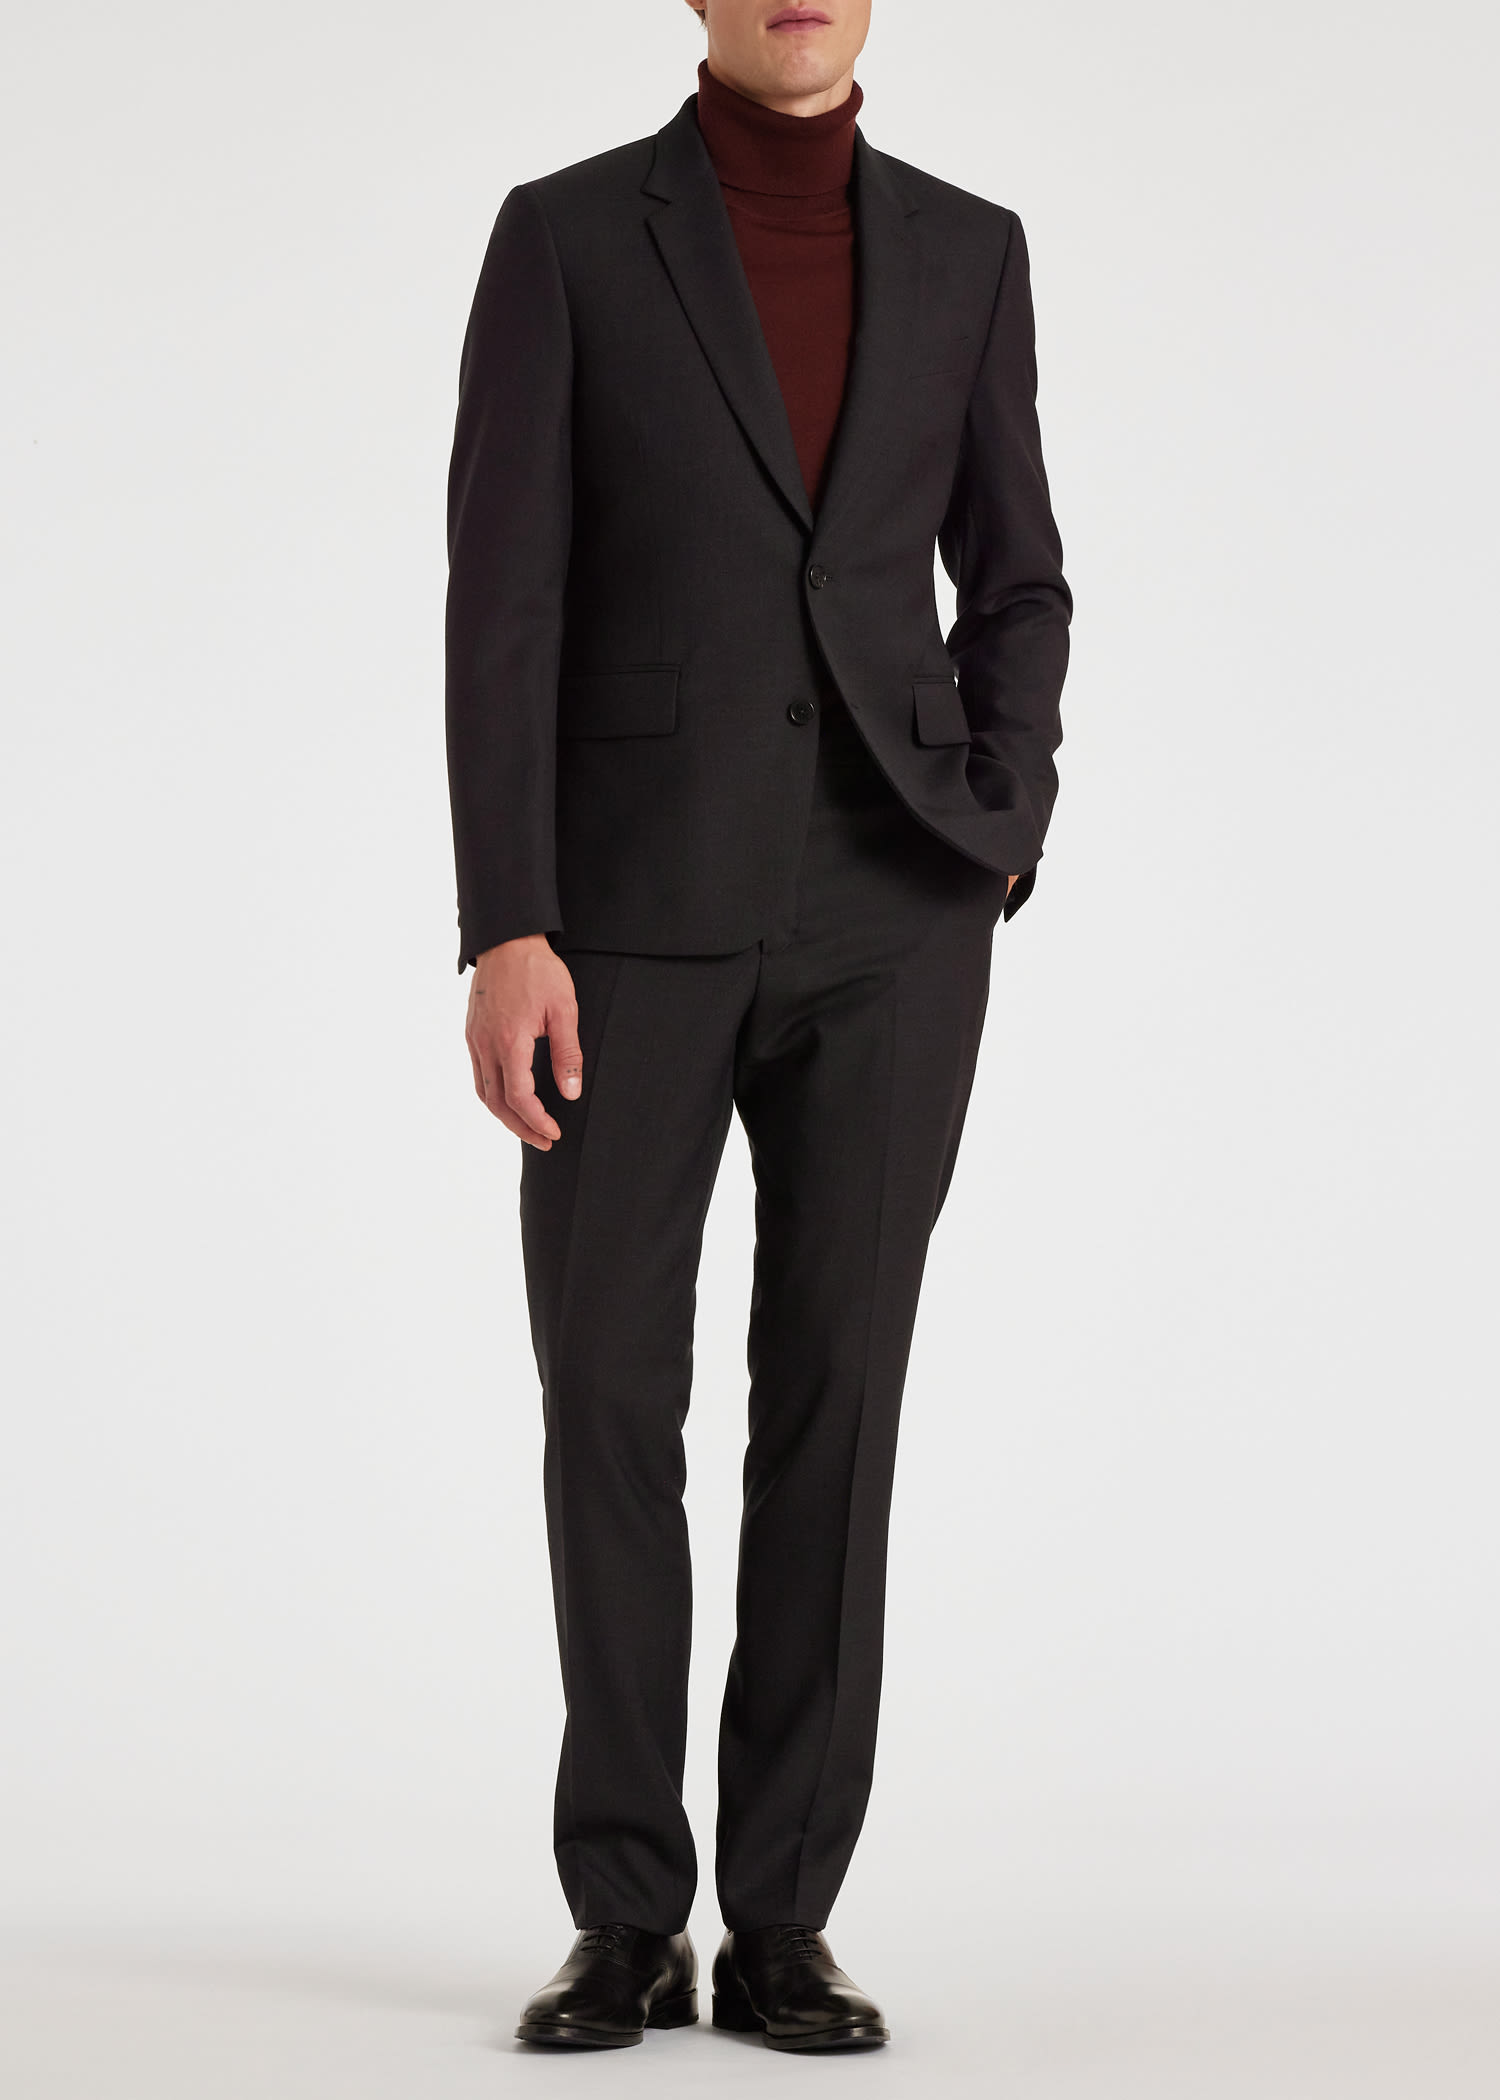 The Soho - Men's Tailored-Fit Charcoal Grey Wool 'A Suit To Travel In'